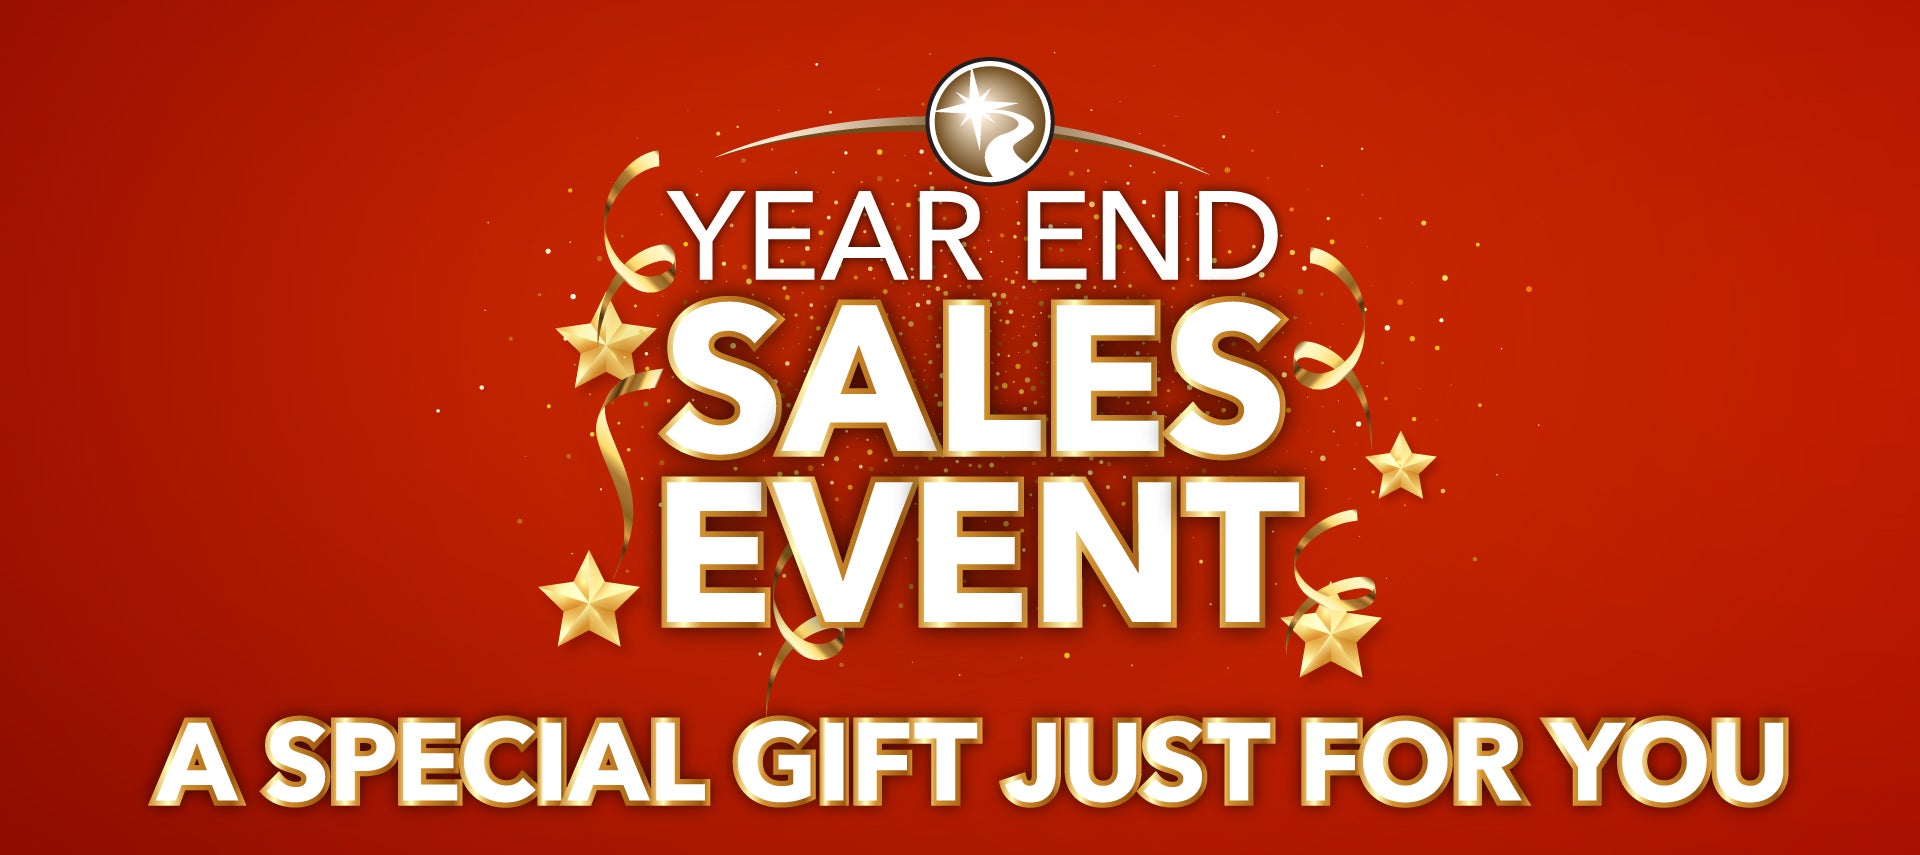 Year End Sales Event - A SPECIAL GIFT JUST FOR YOU